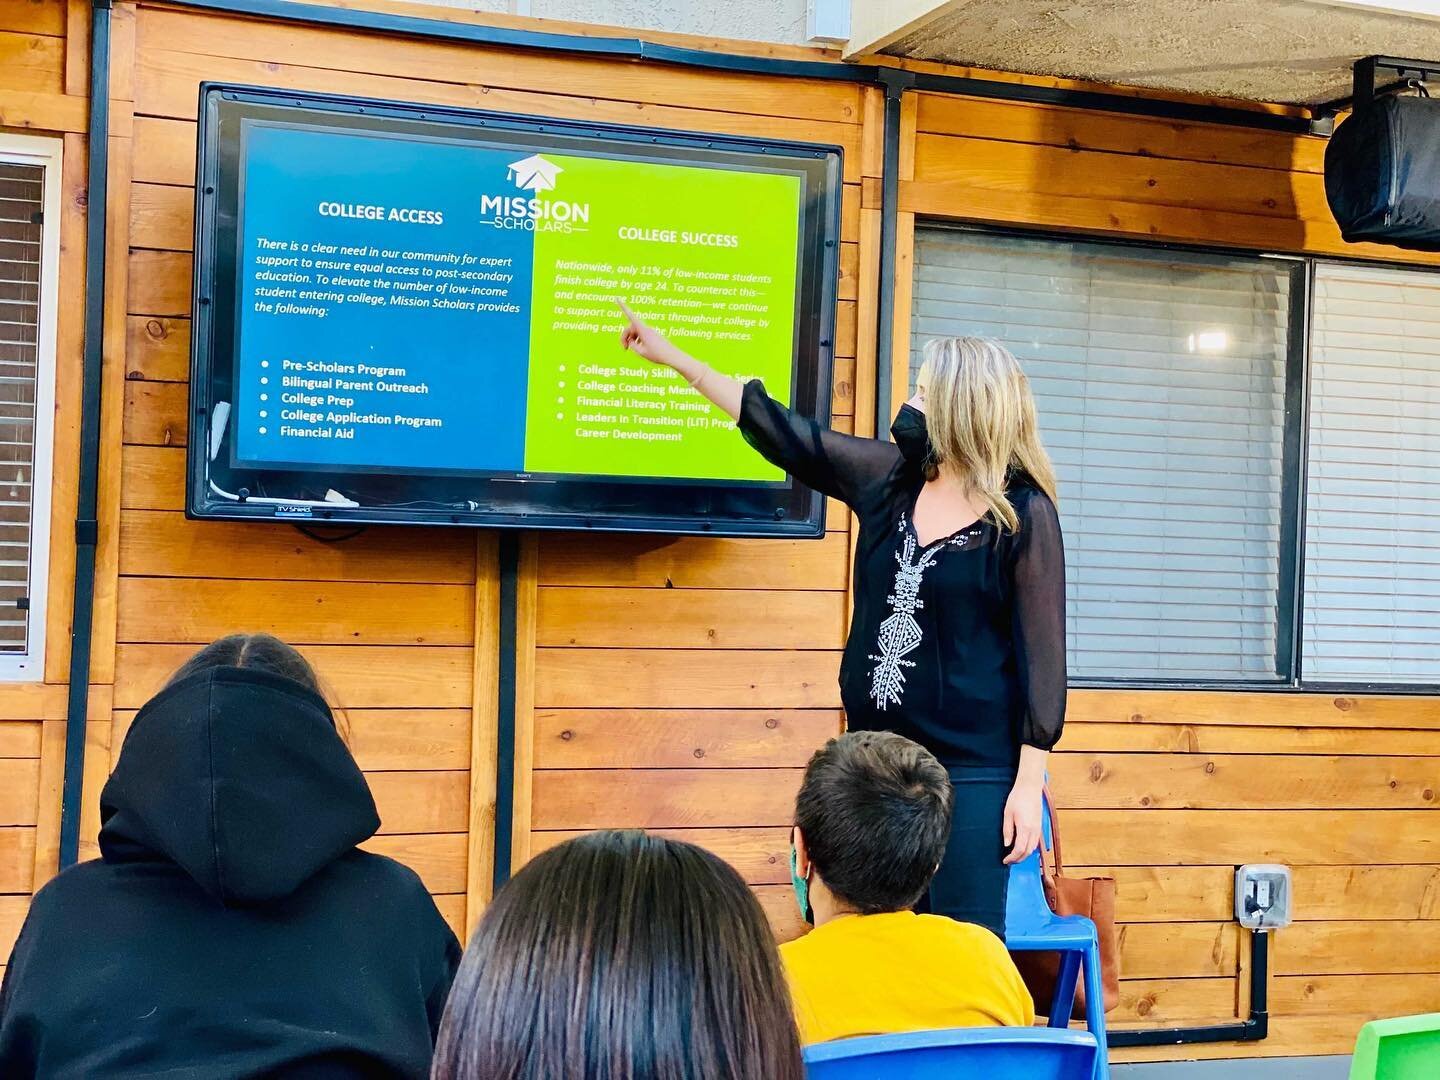 We would love to give a shoutout to our recent guest speaker, Katie Kinsella, from Mission Scholars! We are appreciative of the time Katie spent talking with our teen program about college application preparation, scholarships, and what Mission Schol